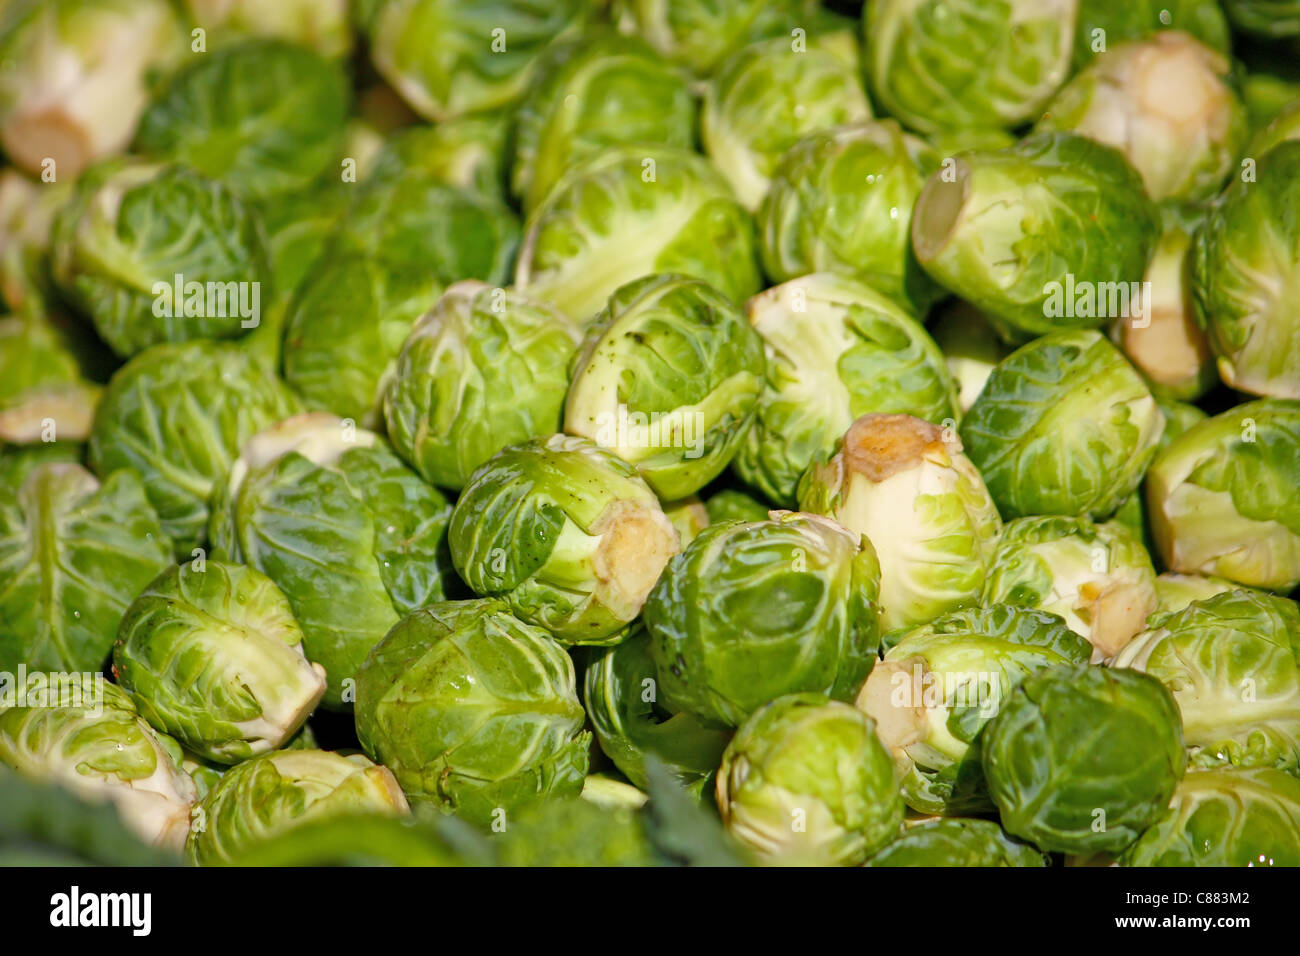 Lots of brussels sprout vegetables on the market Stock Photo